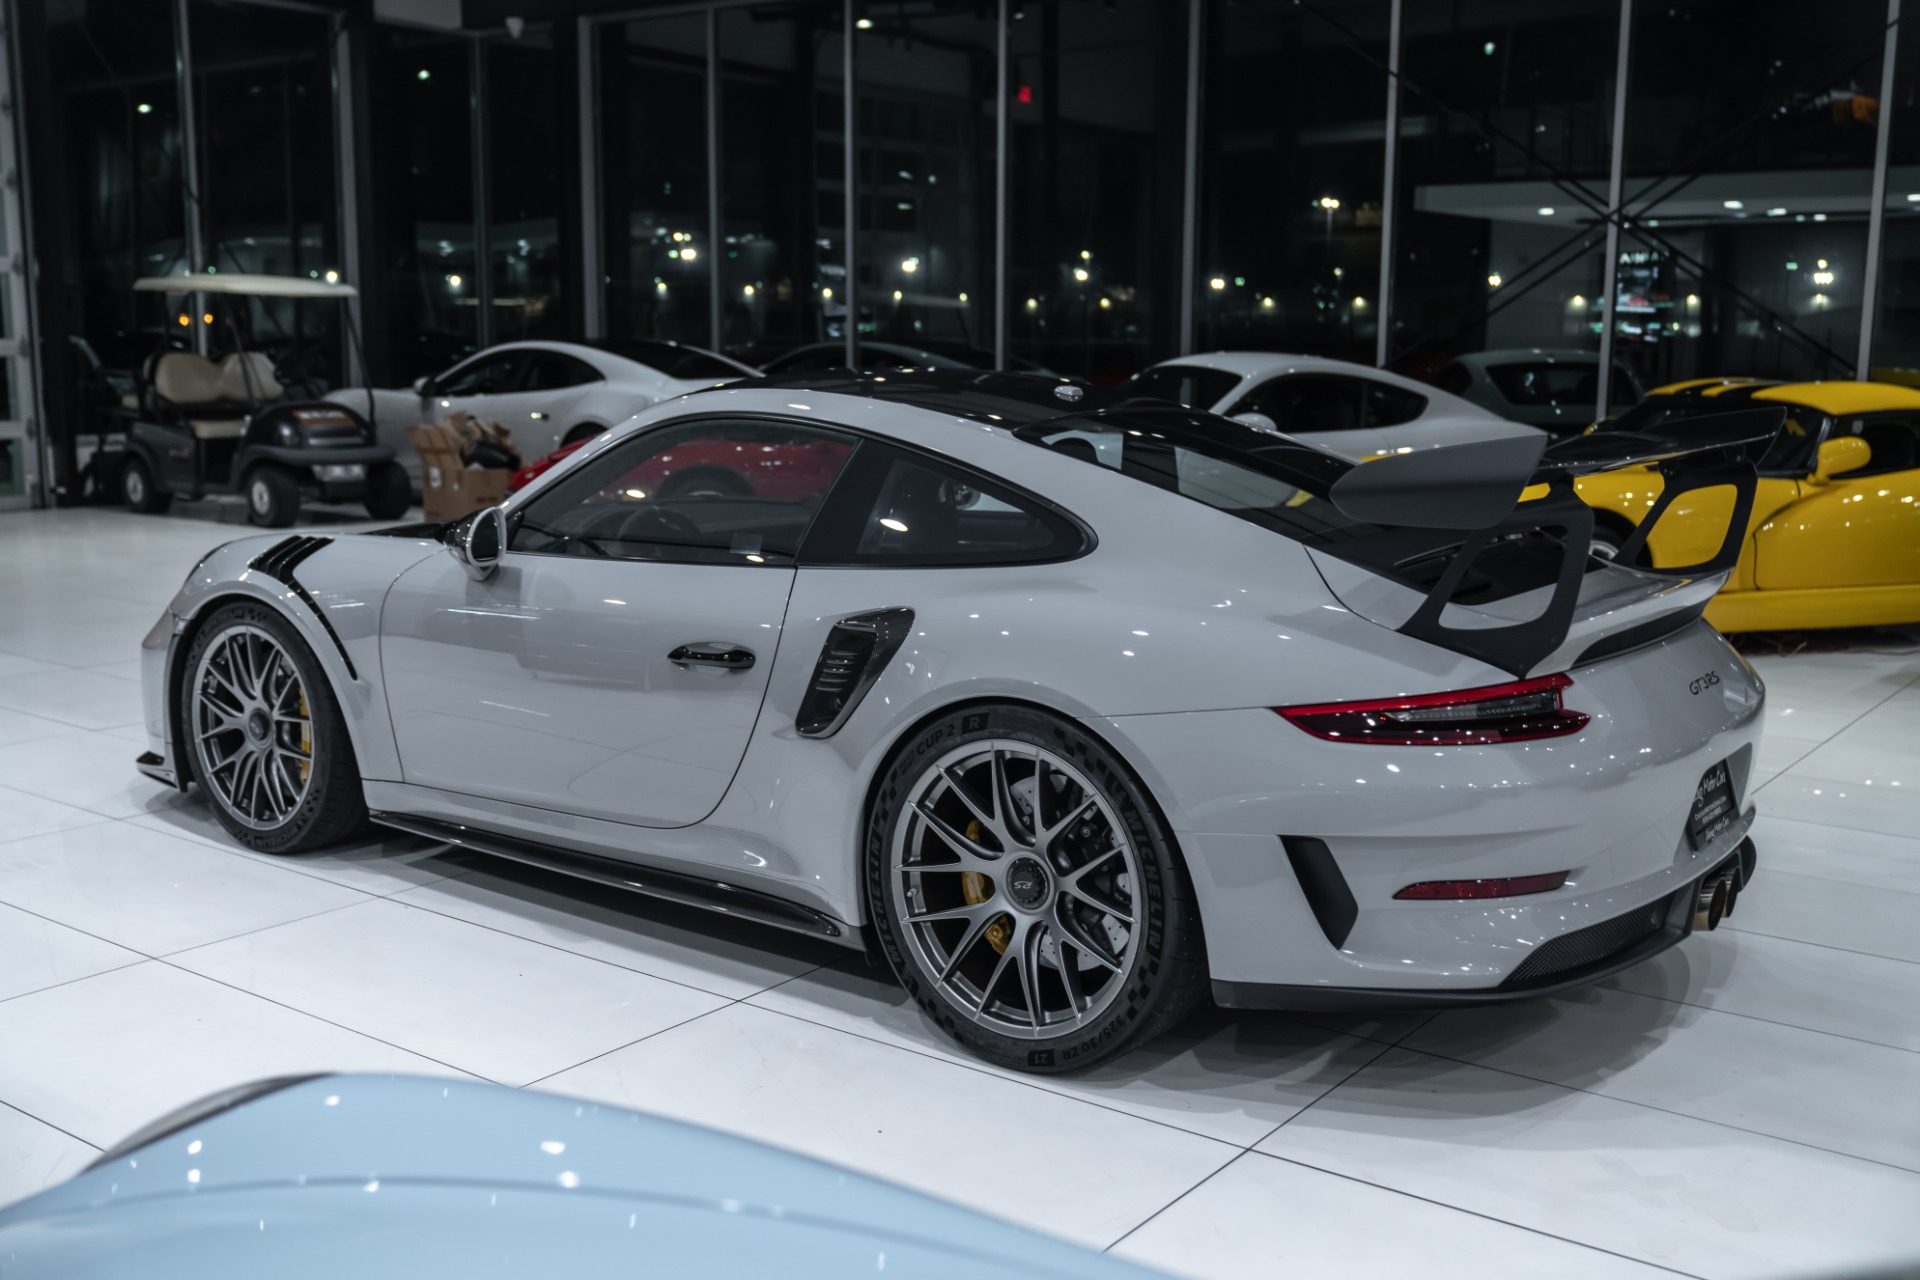 Used-2019-Porsche-911-GT3RS-Weissach-Package-Magnesium-Wheels-Carbon-Fiber-Front-Lift-Huge-Msrp